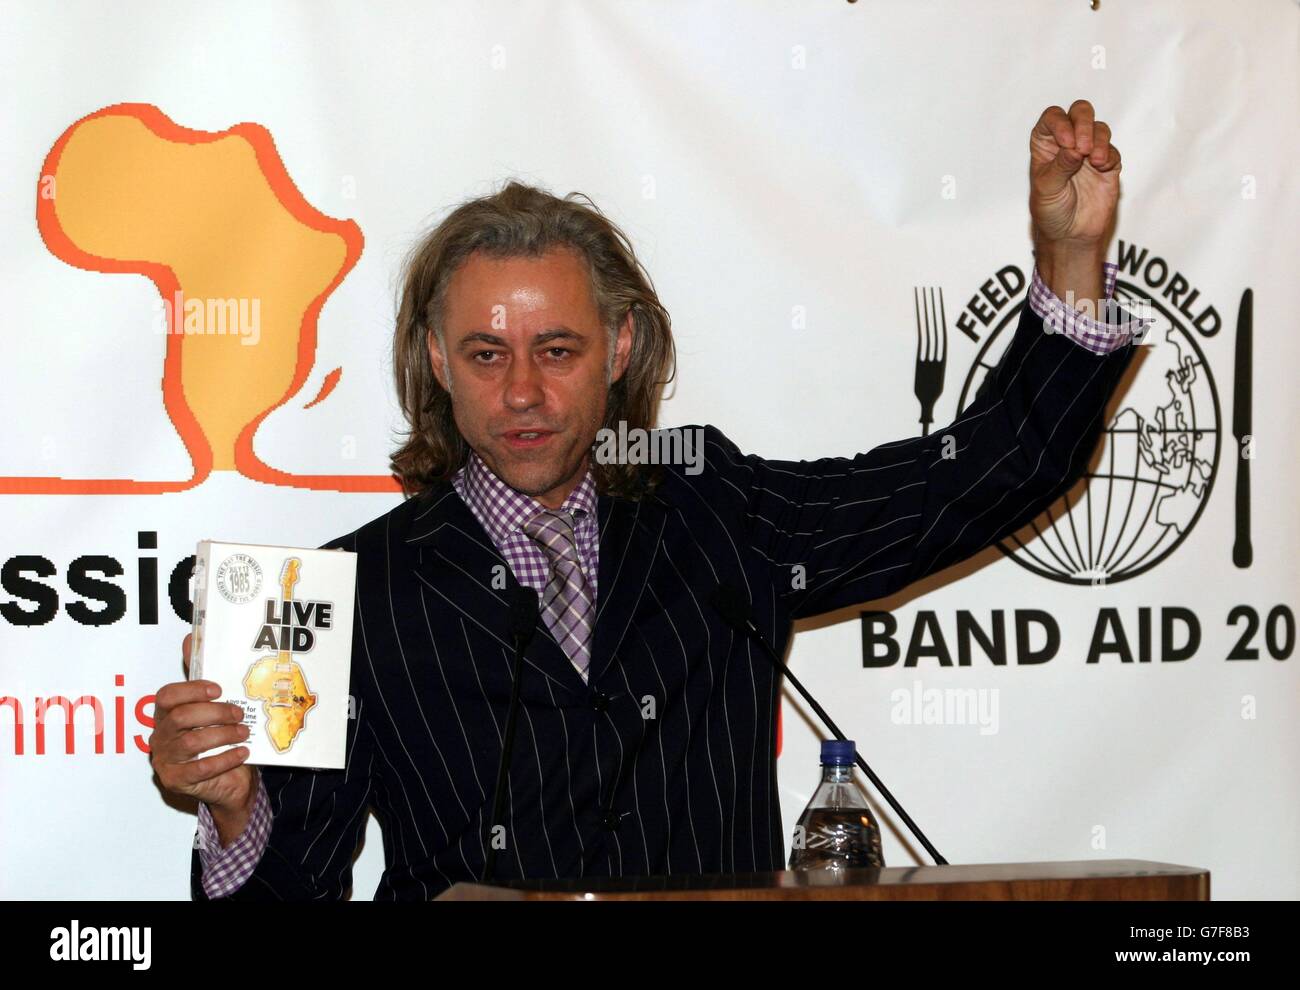 Bob Geldof in New York City to promote the Live Aid DVD. His appearance followed the broadcast in Britain of the new Band Aid 20 charity single to raise money for Africa. Stock Photo